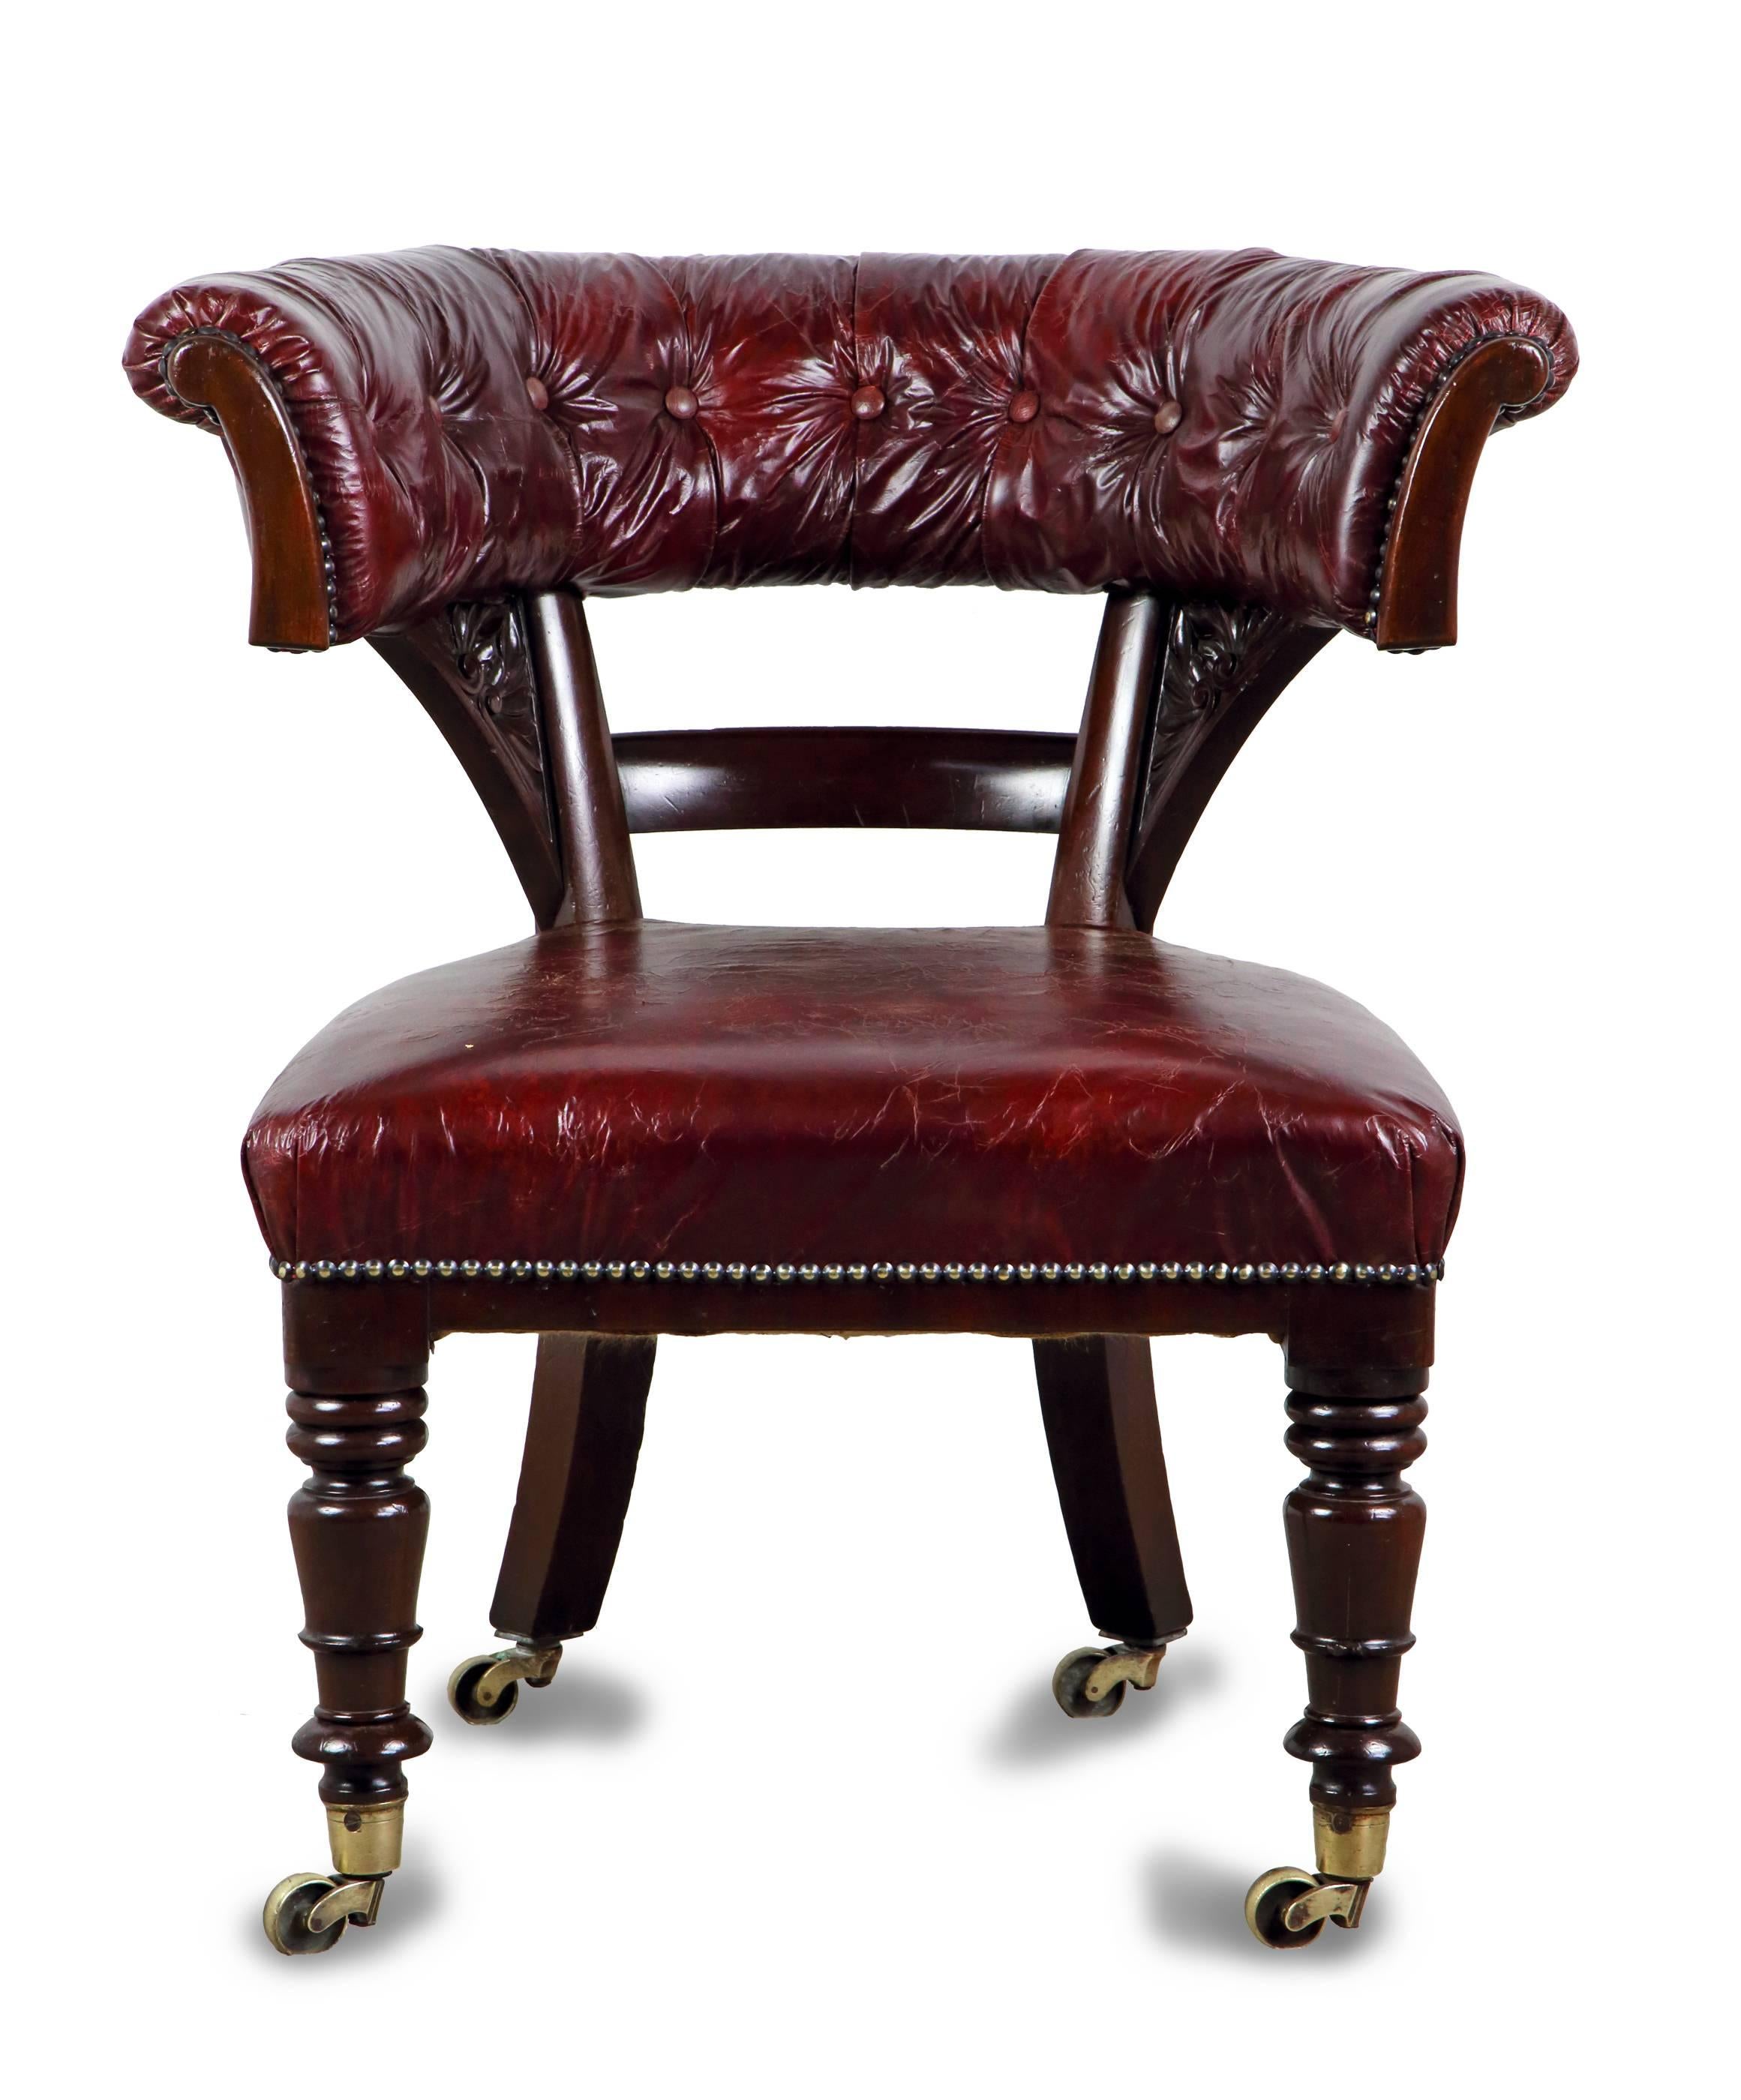 A handsome, generously proportioned, and superb quality mid-19th century period mahogany and leather upholstered gentleman’s desk or library chair, having a ‘horseshoe’ shaped button upholstered back, above a plain bar splat flanked by uprights with